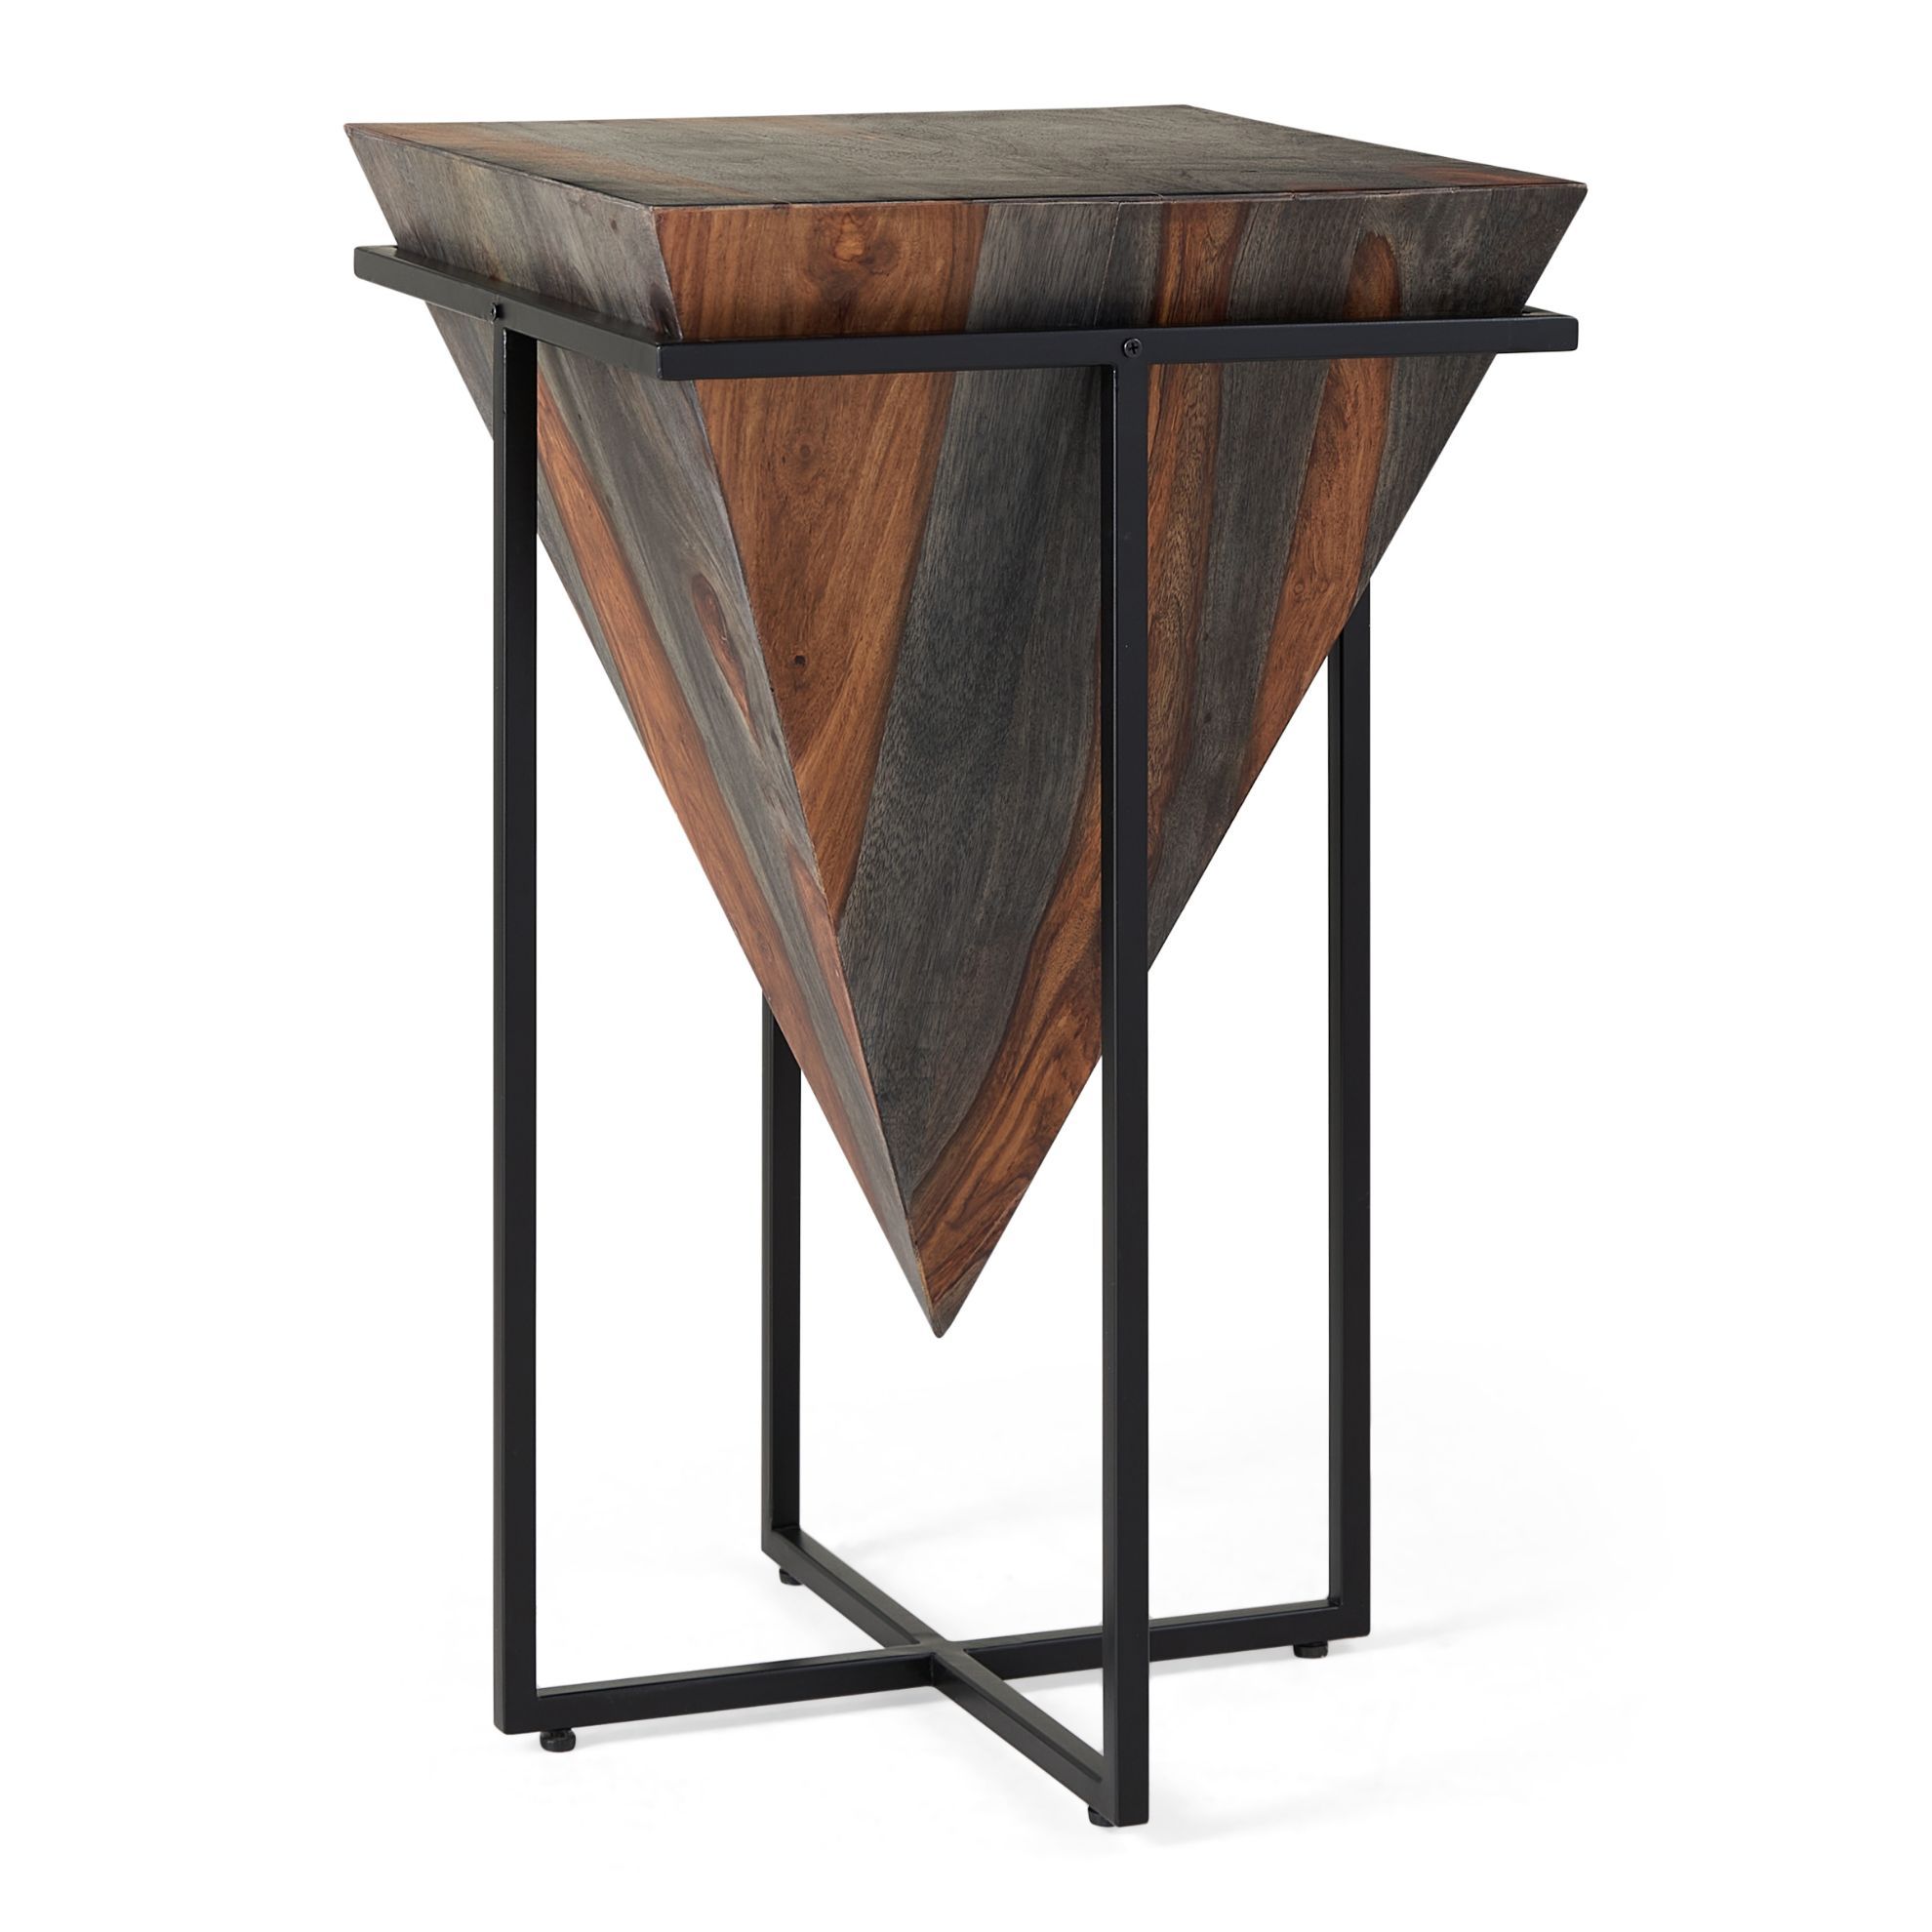 Sierra and Black Accent Table